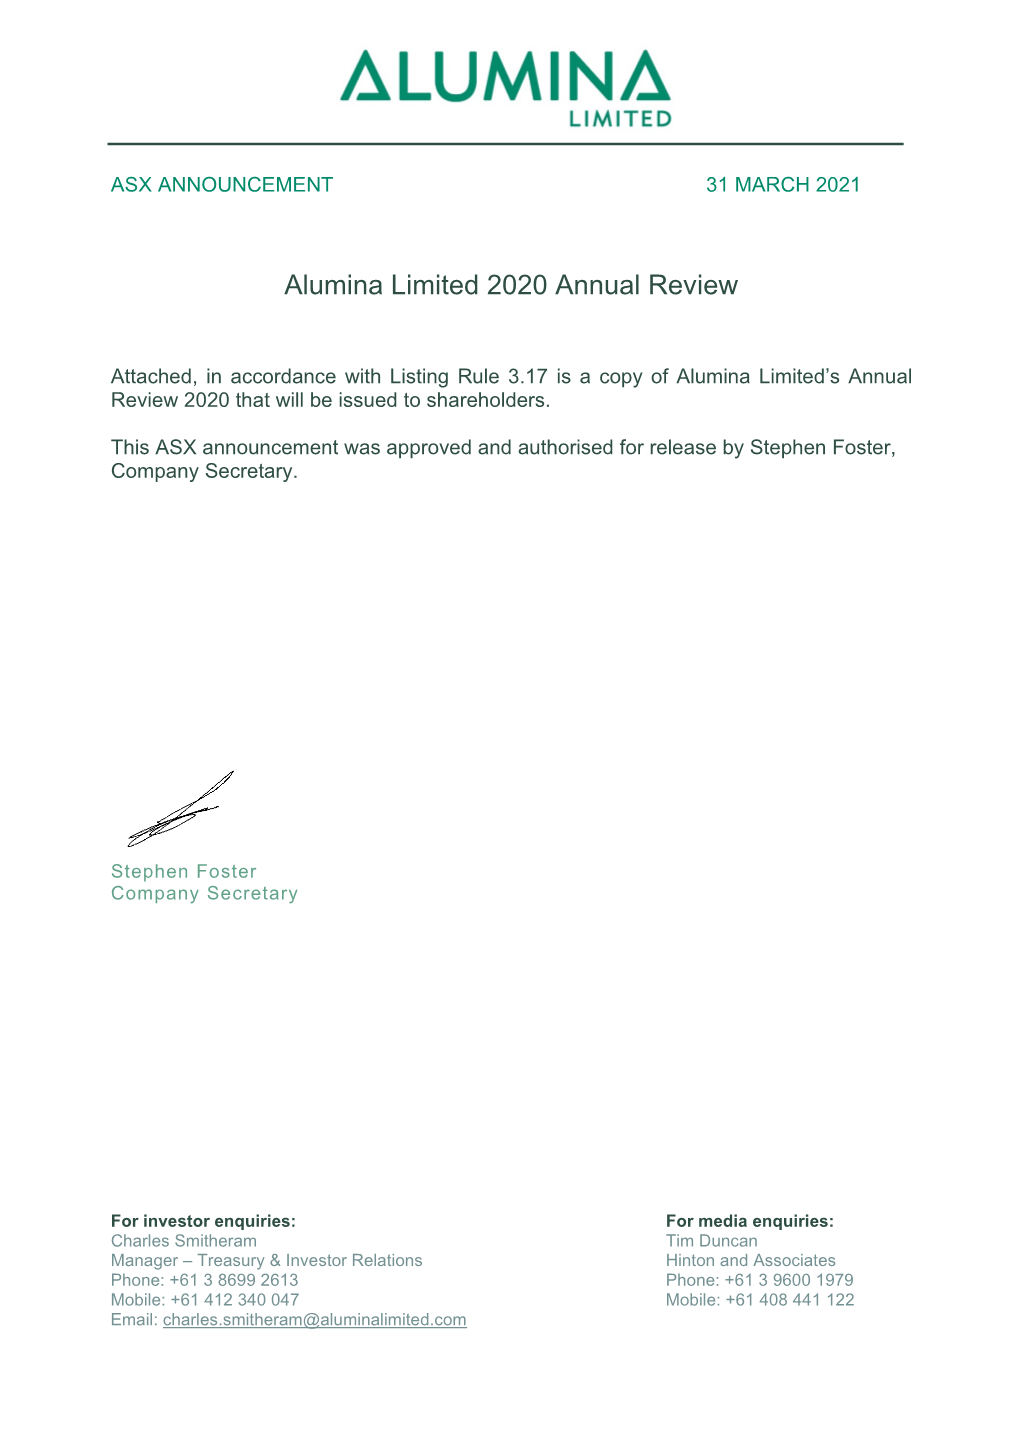 Alumina Limited 2020 Annual Review